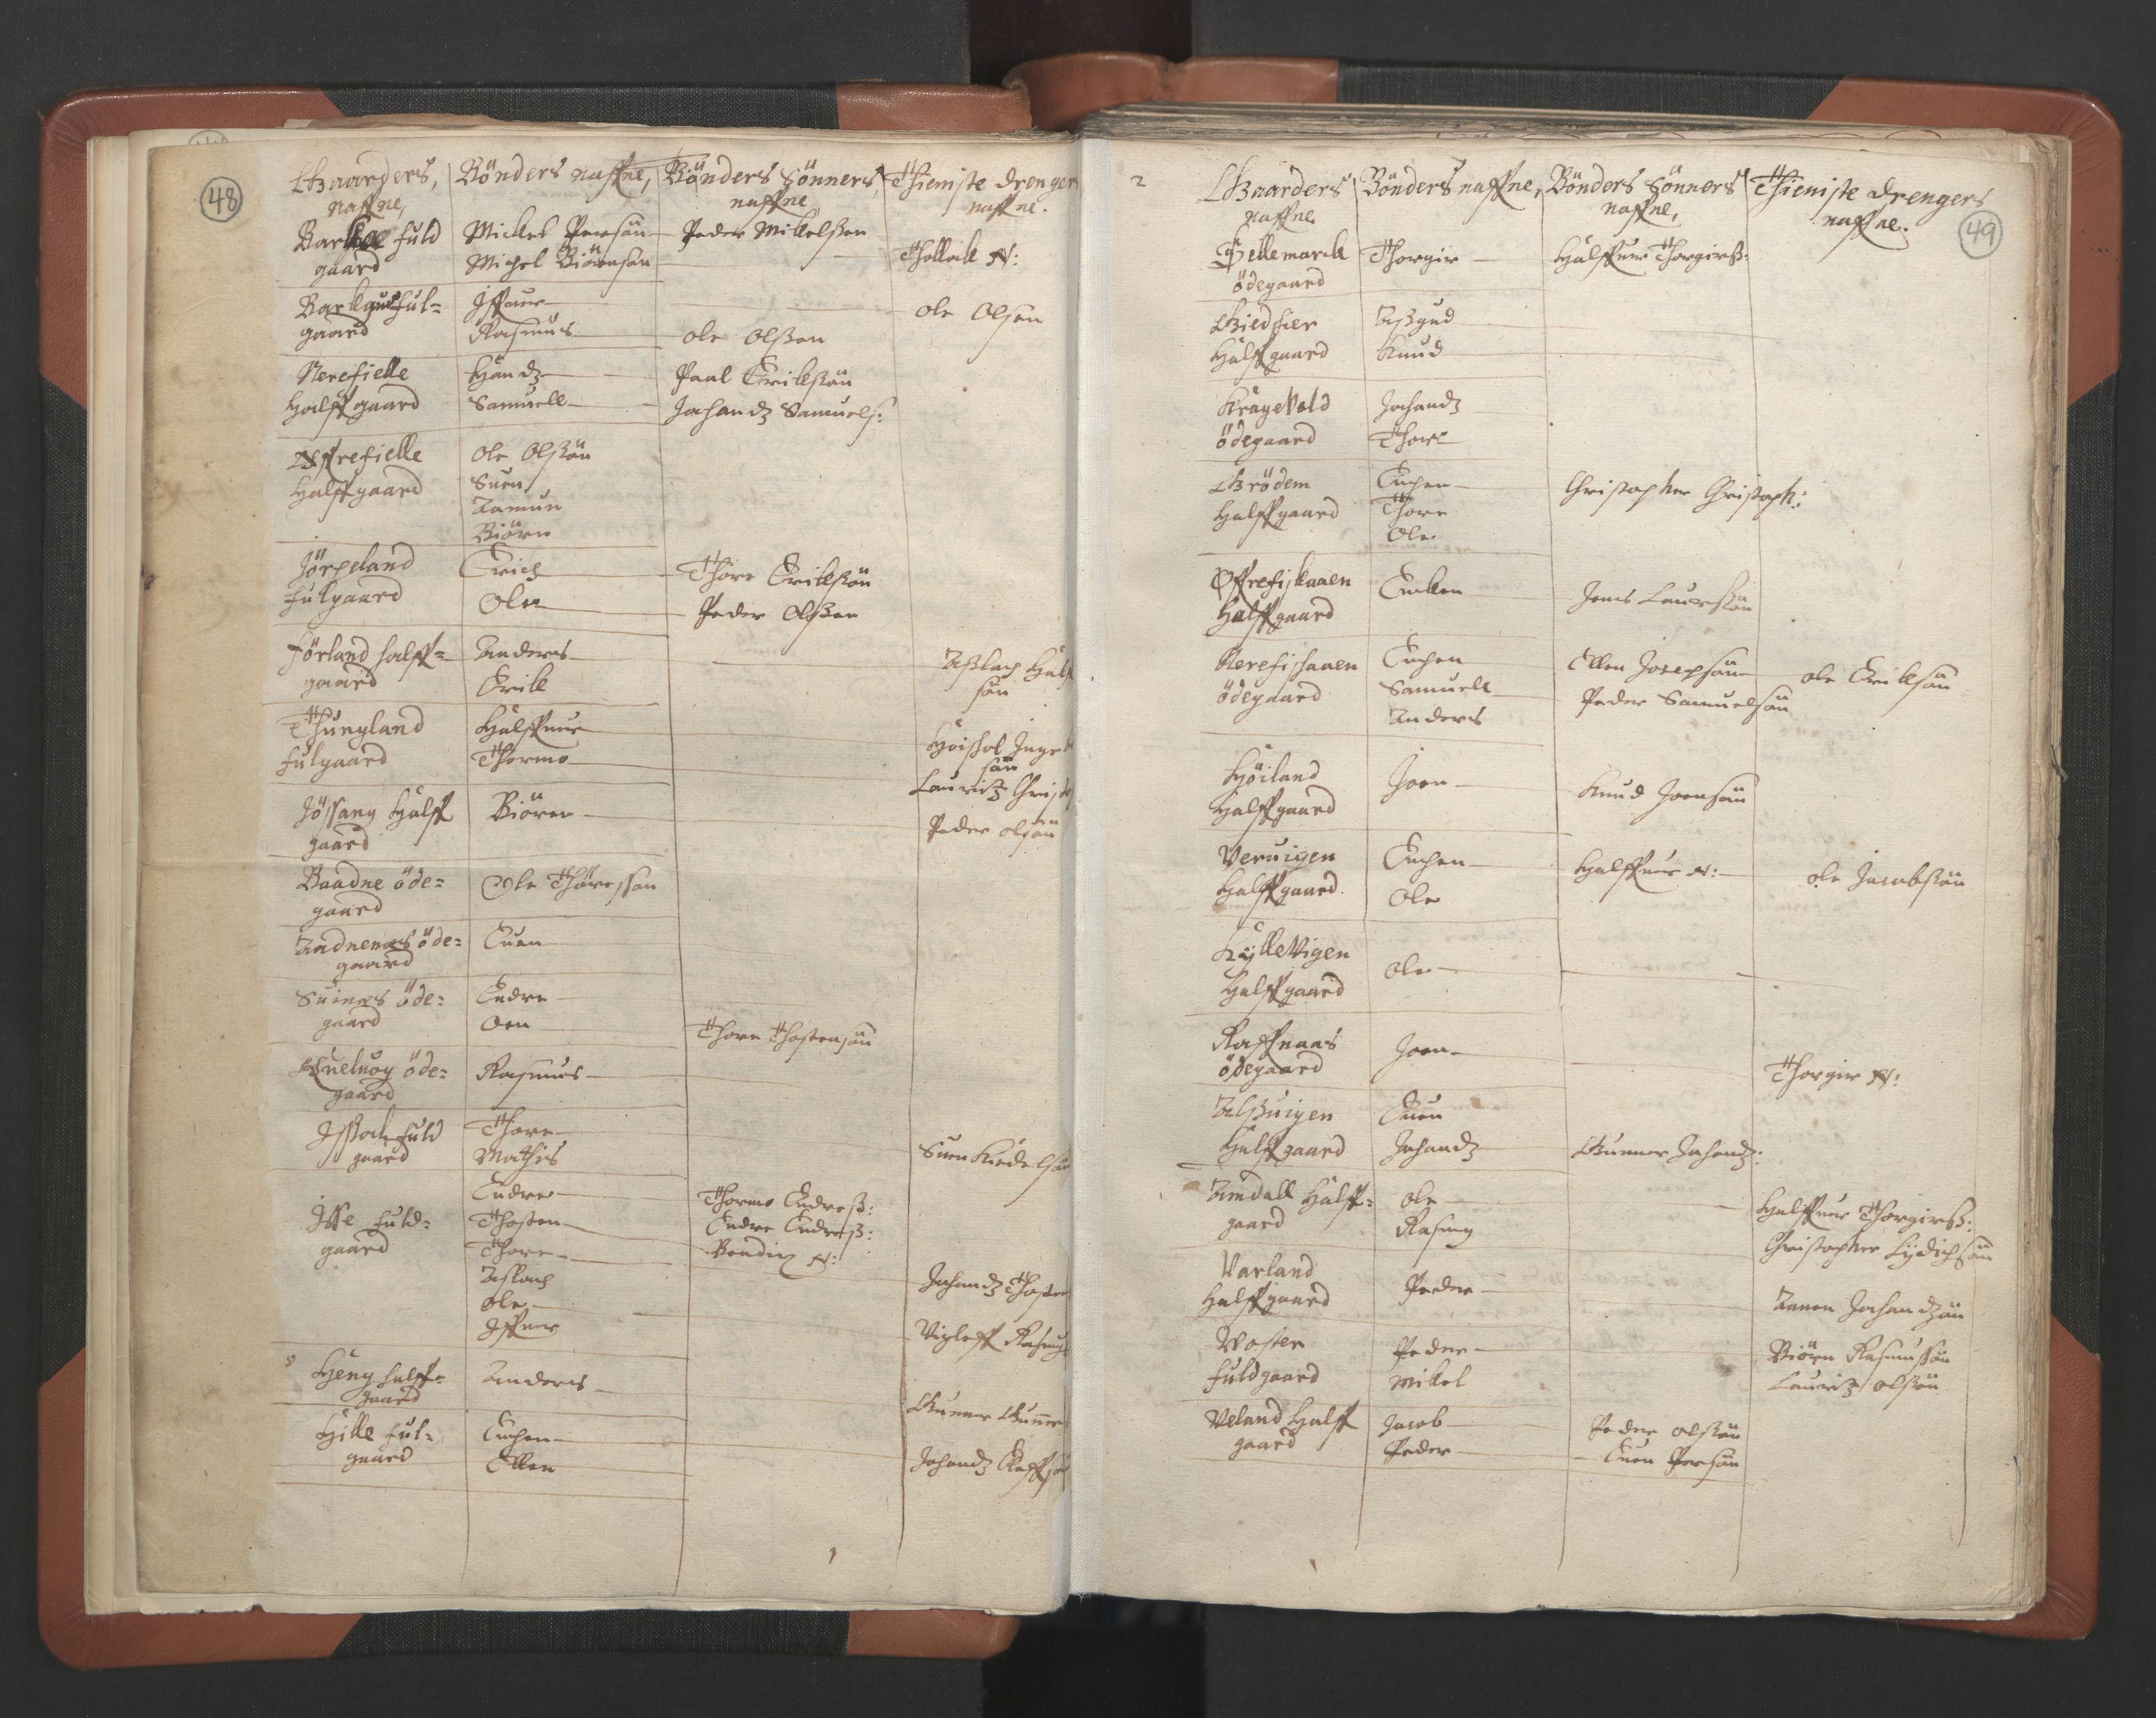 RA, Vicar's Census 1664-1666, no. 18: Stavanger deanery and Karmsund deanery, 1664-1666, p. 48-49